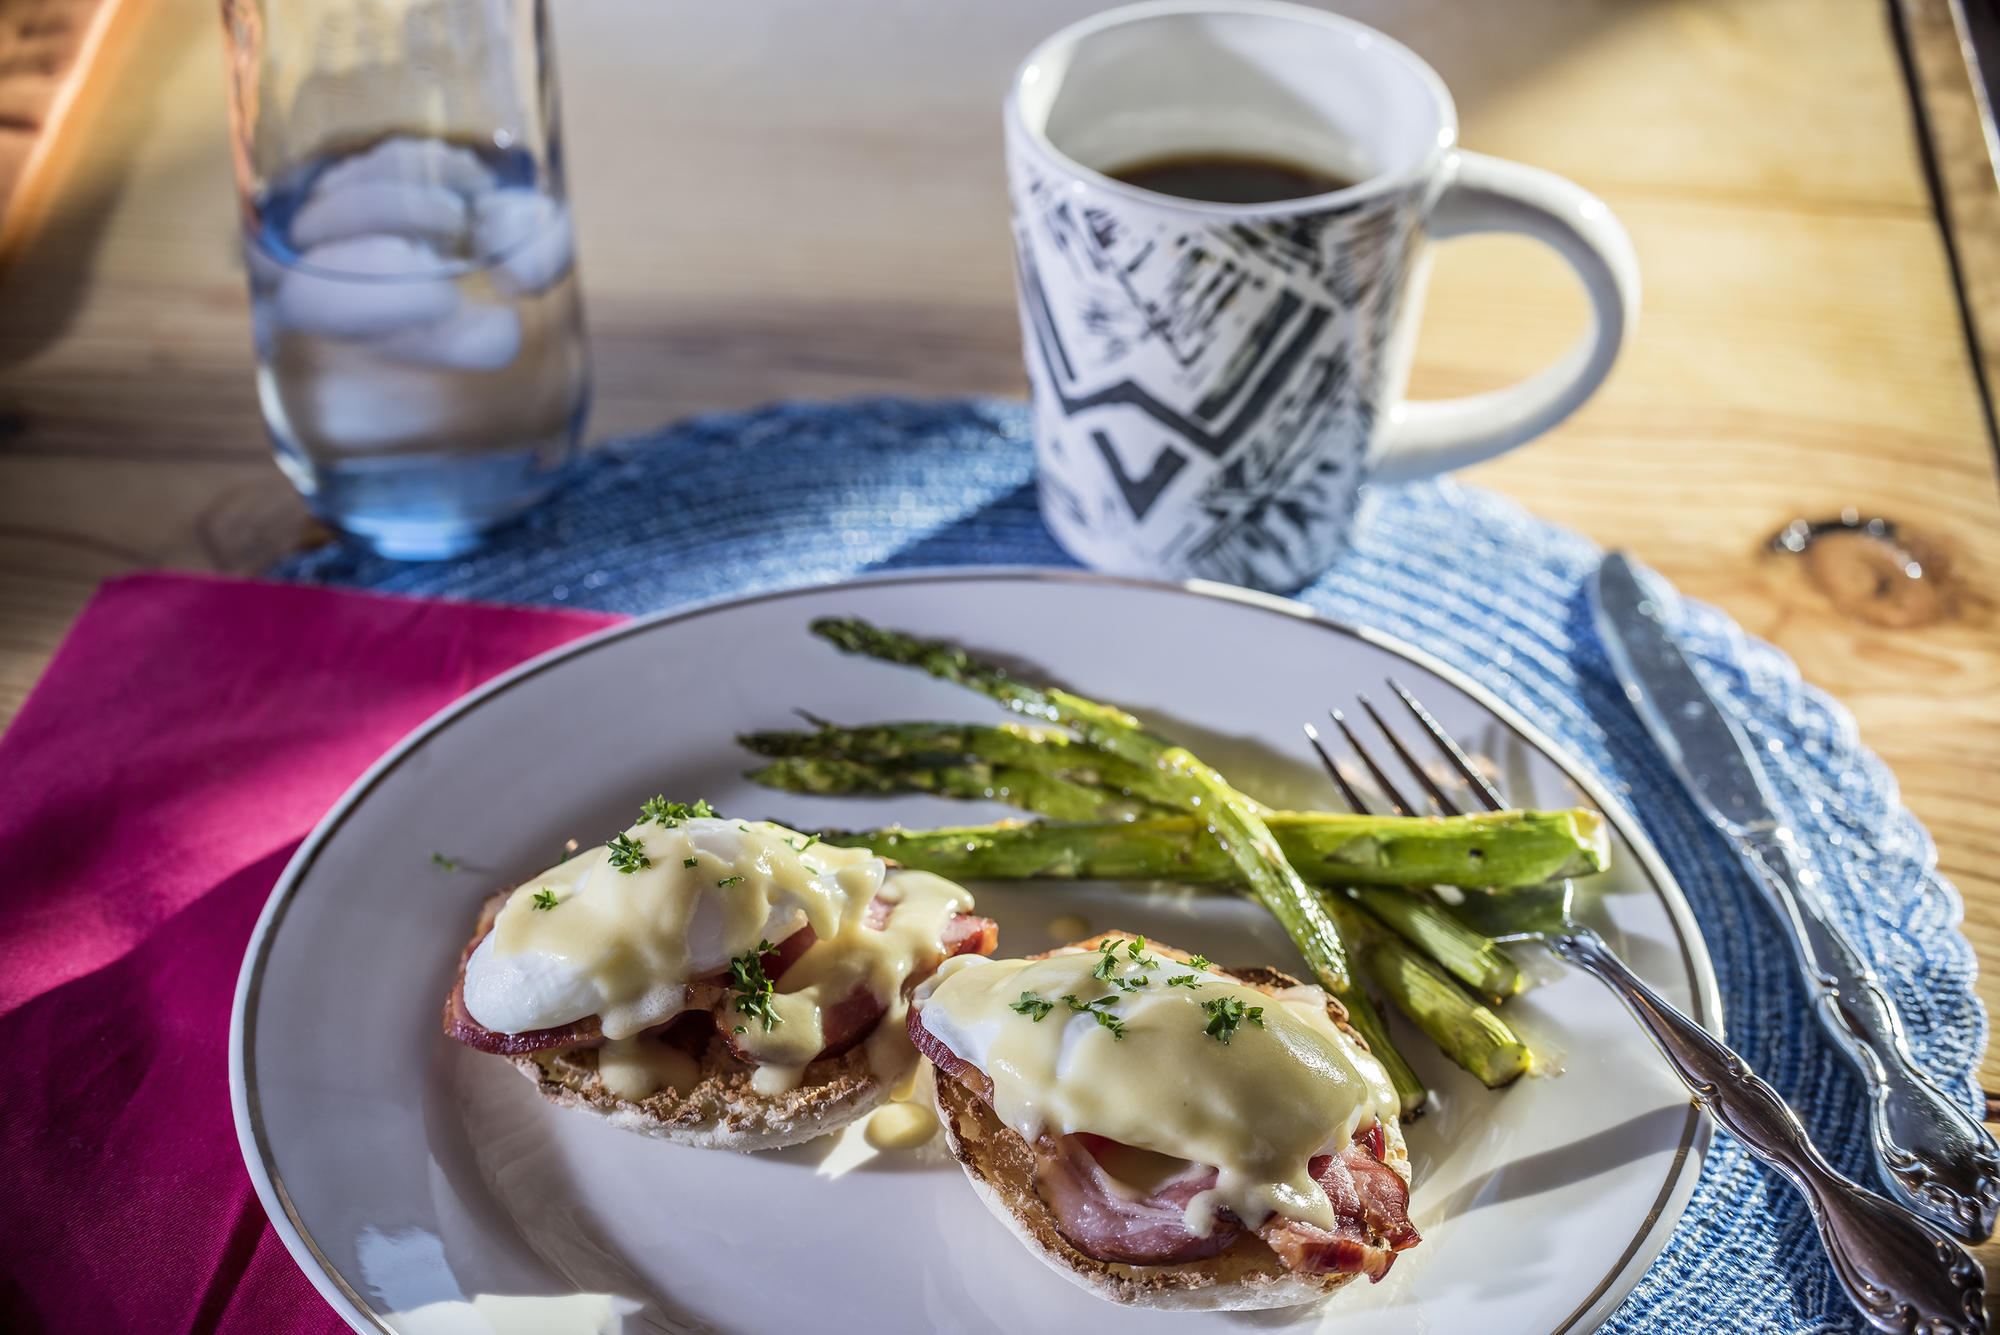 Two English muffin halves with ham and hollandaise sauce with asparagus